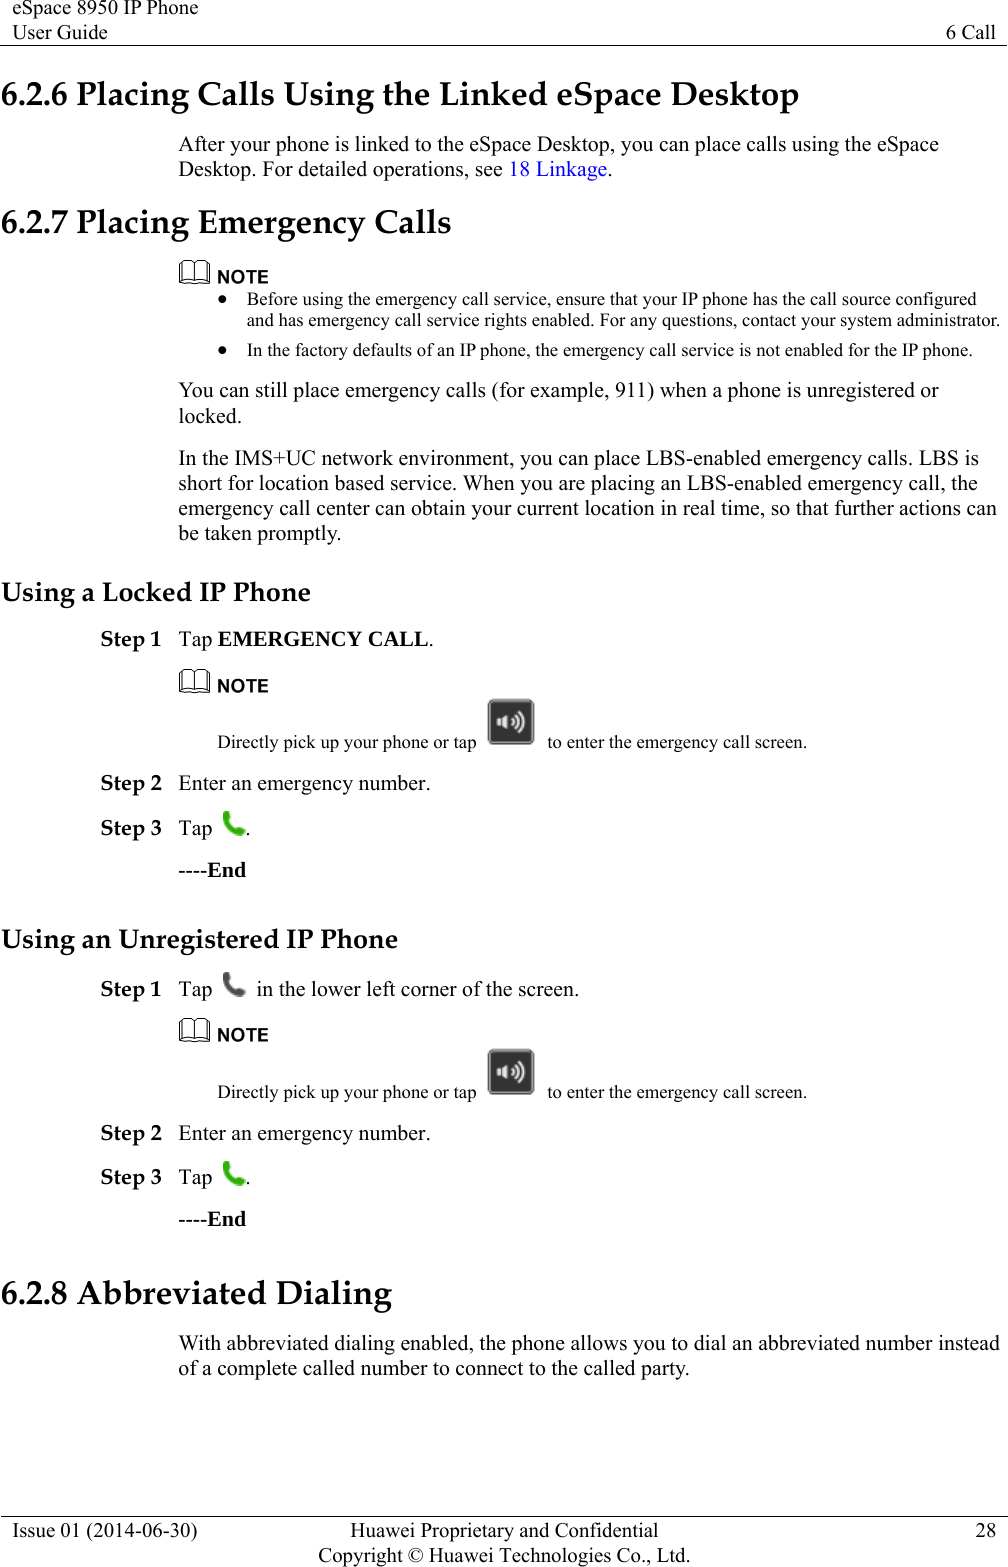 eSpace 8950 IP Phone User Guide  6 Call Issue 01 (2014-06-30)  Huawei Proprietary and Confidential         Copyright © Huawei Technologies Co., Ltd.28 6.2.6 Placing Calls Using the Linked eSpace Desktop After your phone is linked to the eSpace Desktop, you can place calls using the eSpace Desktop. For detailed operations, see 18 Linkage. 6.2.7 Placing Emergency Calls   Before using the emergency call service, ensure that your IP phone has the call source configured and has emergency call service rights enabled. For any questions, contact your system administrator.  In the factory defaults of an IP phone, the emergency call service is not enabled for the IP phone. You can still place emergency calls (for example, 911) when a phone is unregistered or locked. In the IMS+UC network environment, you can place LBS-enabled emergency calls. LBS is short for location based service. When you are placing an LBS-enabled emergency call, the emergency call center can obtain your current location in real time, so that further actions can be taken promptly. Using a Locked IP Phone Step 1 Tap EMERGENCY CALL.  Directly pick up your phone or tap    to enter the emergency call screen. Step 2 Enter an emergency number. Step 3 Tap  . ----End Using an Unregistered IP Phone Step 1 Tap    in the lower left corner of the screen.  Directly pick up your phone or tap    to enter the emergency call screen. Step 2 Enter an emergency number. Step 3 Tap  . ----End 6.2.8 Abbreviated Dialing With abbreviated dialing enabled, the phone allows you to dial an abbreviated number instead of a complete called number to connect to the called party. 